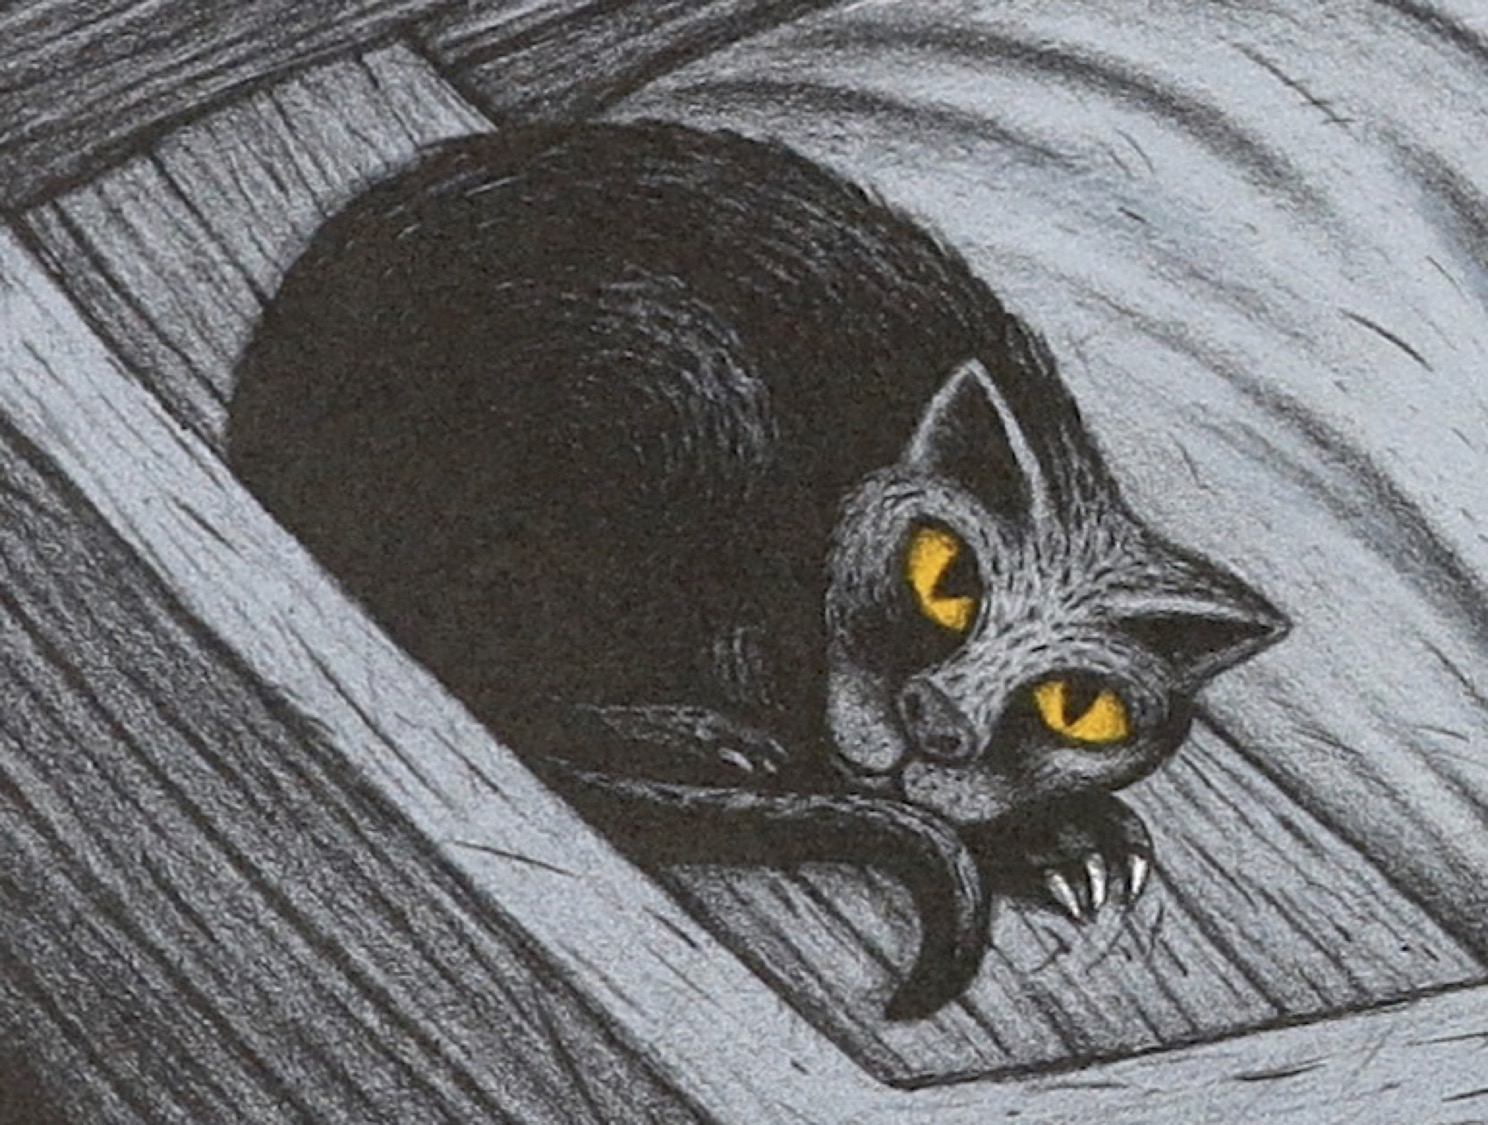 Detail of Silent Water print, showing black cat curled up with yellow eyes open